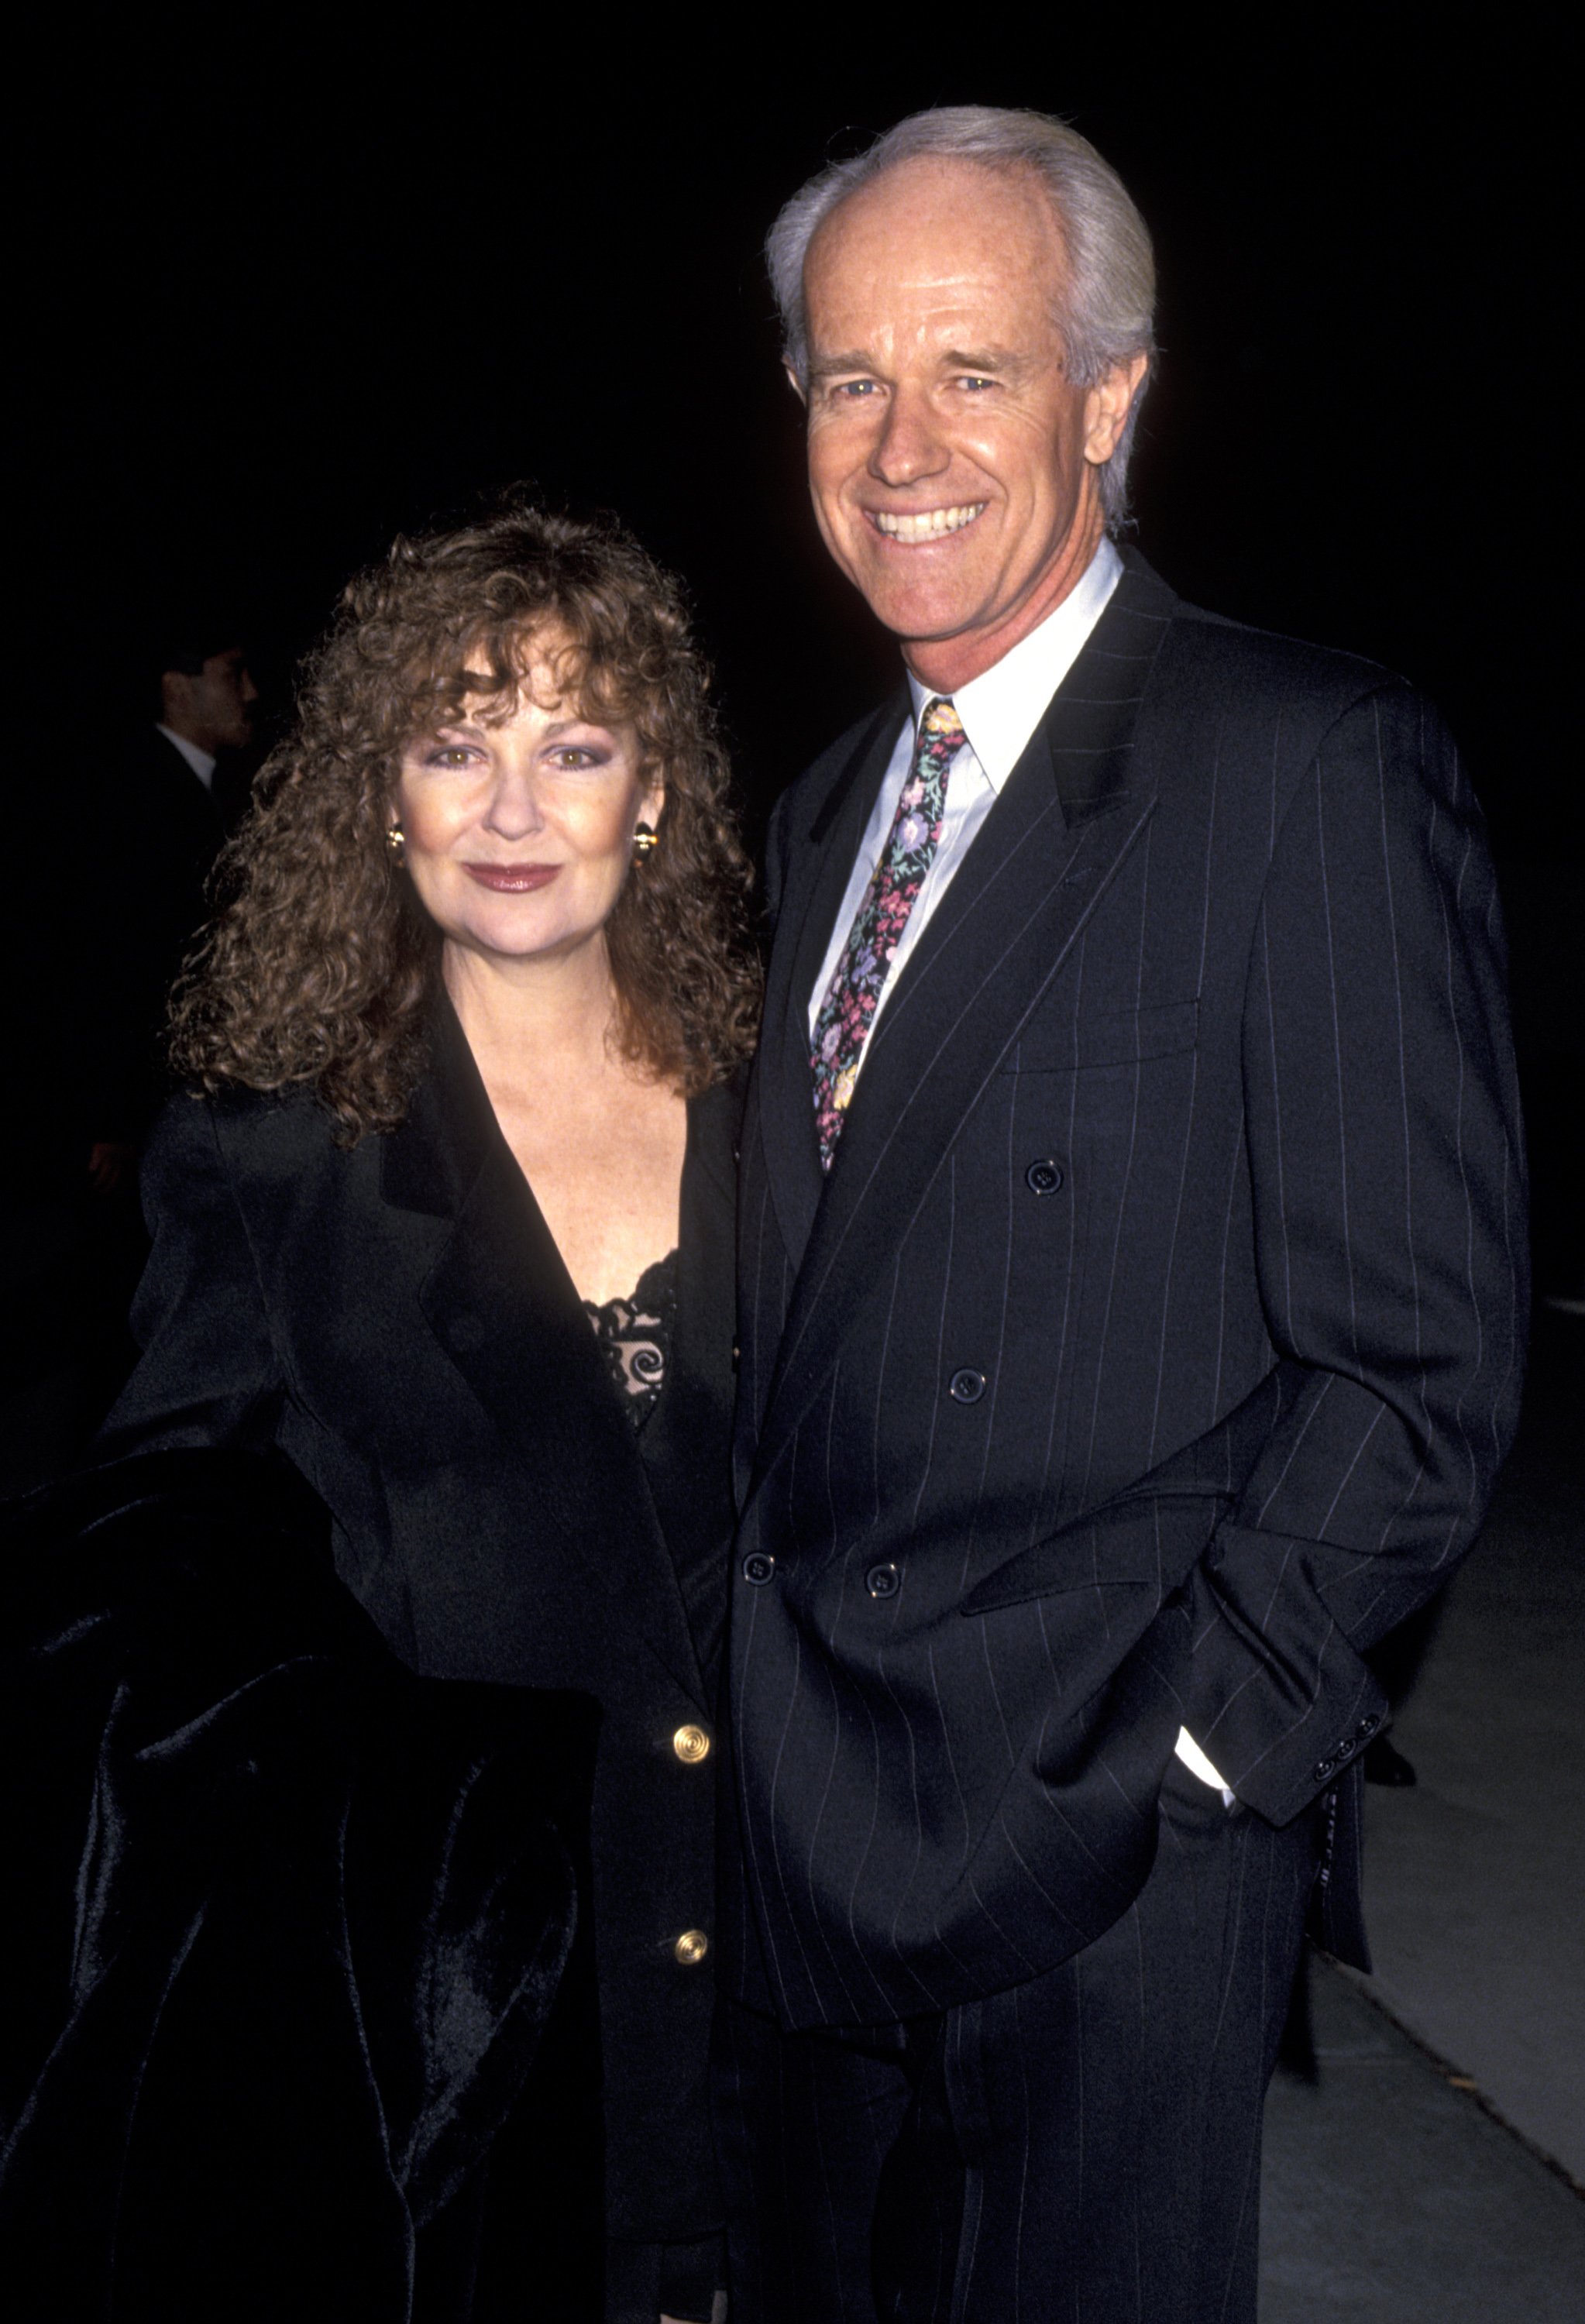 Shelley Fabares and Mike Farrell attend the APLA Commitment to Live VII at Universal Studios on January 27, 1994 in Universal City, California. / Source: Getty Images